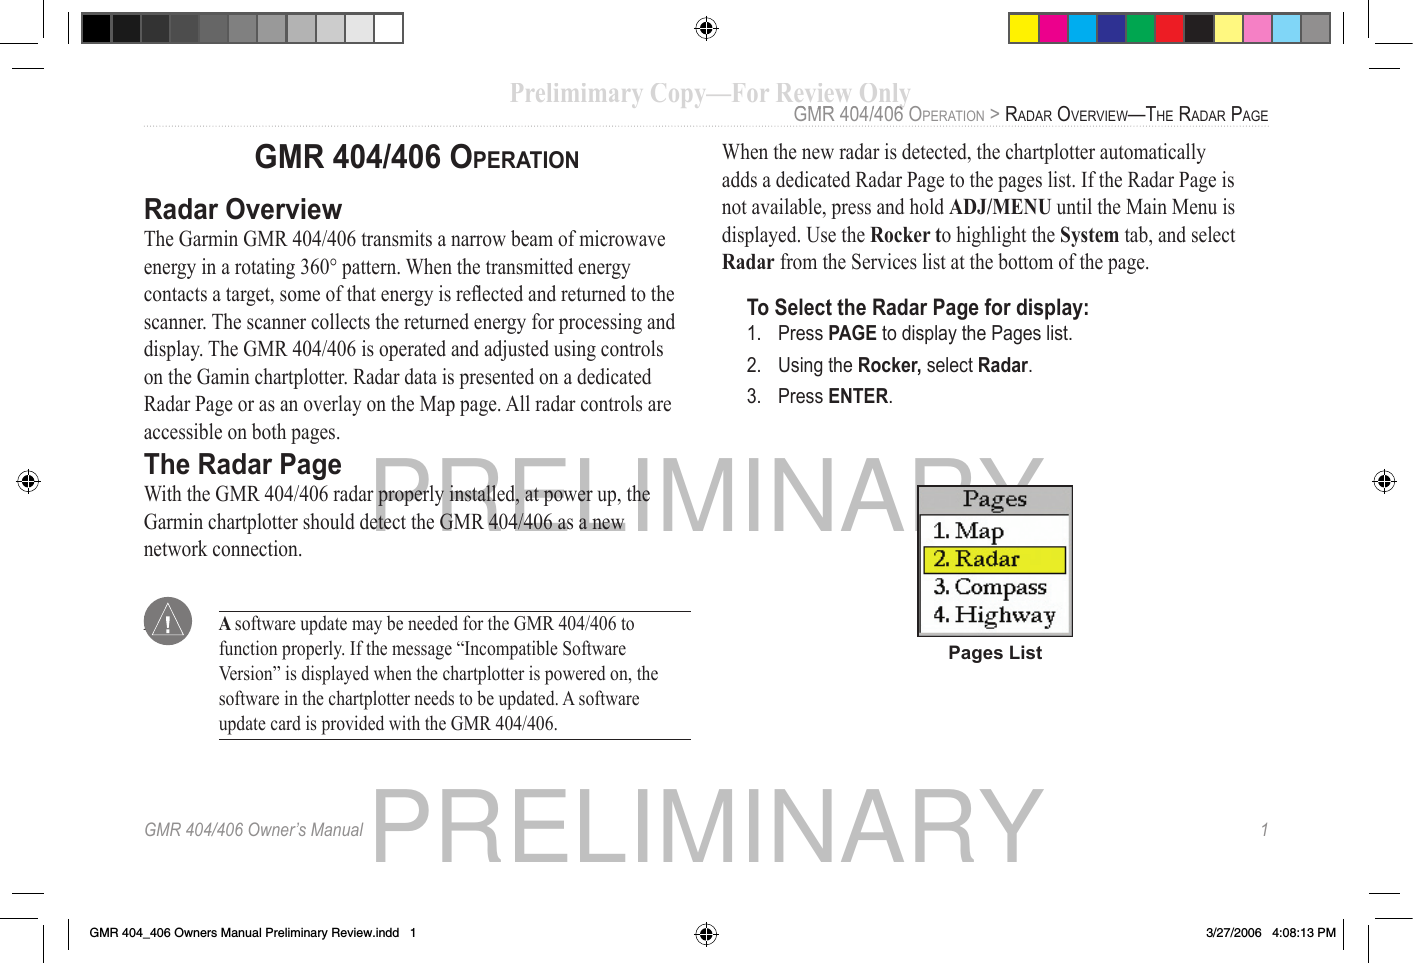 PRELIMINARYPRELIMINARYGMR 404/406 Owner’s Manual   1GMR 404/406 OPERATIONRadar  OverviewThe Garmin GMR 404/406 transmits a narrow beam of microwave energy in a rotating 360° pattern. When the transmitted energy contacts a target, some of that energy is reﬂ ected and returned to the scanner. The scanner collects the returned energy for processing and display. The GMR 404/406 is operated and adjusted using controls on the Gamin chartplotter. Radar data is presented on a dedicated Radar Page or as an overlay on the Map page. All radar controls are accessible on both pages.The   Radar PageWith the GMR 404/406 radar properly installed, at power up, the Garmin chartplotter should detect the GMR 404/406 as a new network connection. Note:   A  software update may be needed for the GMR 404/406 to function properly. If the message “Incompatible Software Version” is displayed when the chartplotter is powered on, the software in the chartplotter needs to be updated. A software update card is provided with the GMR 404/406.When the new radar is detected, the chartplotter automatically adds a dedicated Radar Page to the pages list. If the Radar Page is not available, press and hold ADJ/MENU until the Main Menu is displayed. Use the Rocker to highlight the System tab, and select Radar from the Services list at the bottom of the page.To Select the Radar Page for display:1.  Press PAGE to display the Pages list. 2.  Using the Rocker, select Radar.3.  Press ENTER. Pages List GMR 404/406 OPERATION &gt; RADAR OVERVIEW—THE RADAR PAGE Prelimimary Copy—For Review Only GMR 404/406 OPERATION &gt; Prelimimary Copy—For Review Only GMR 404/406 OPERATION &gt; GMR 404_406 Owners Manual Preliminary Review.indd   1 3/27/2006   4:08:13 PM